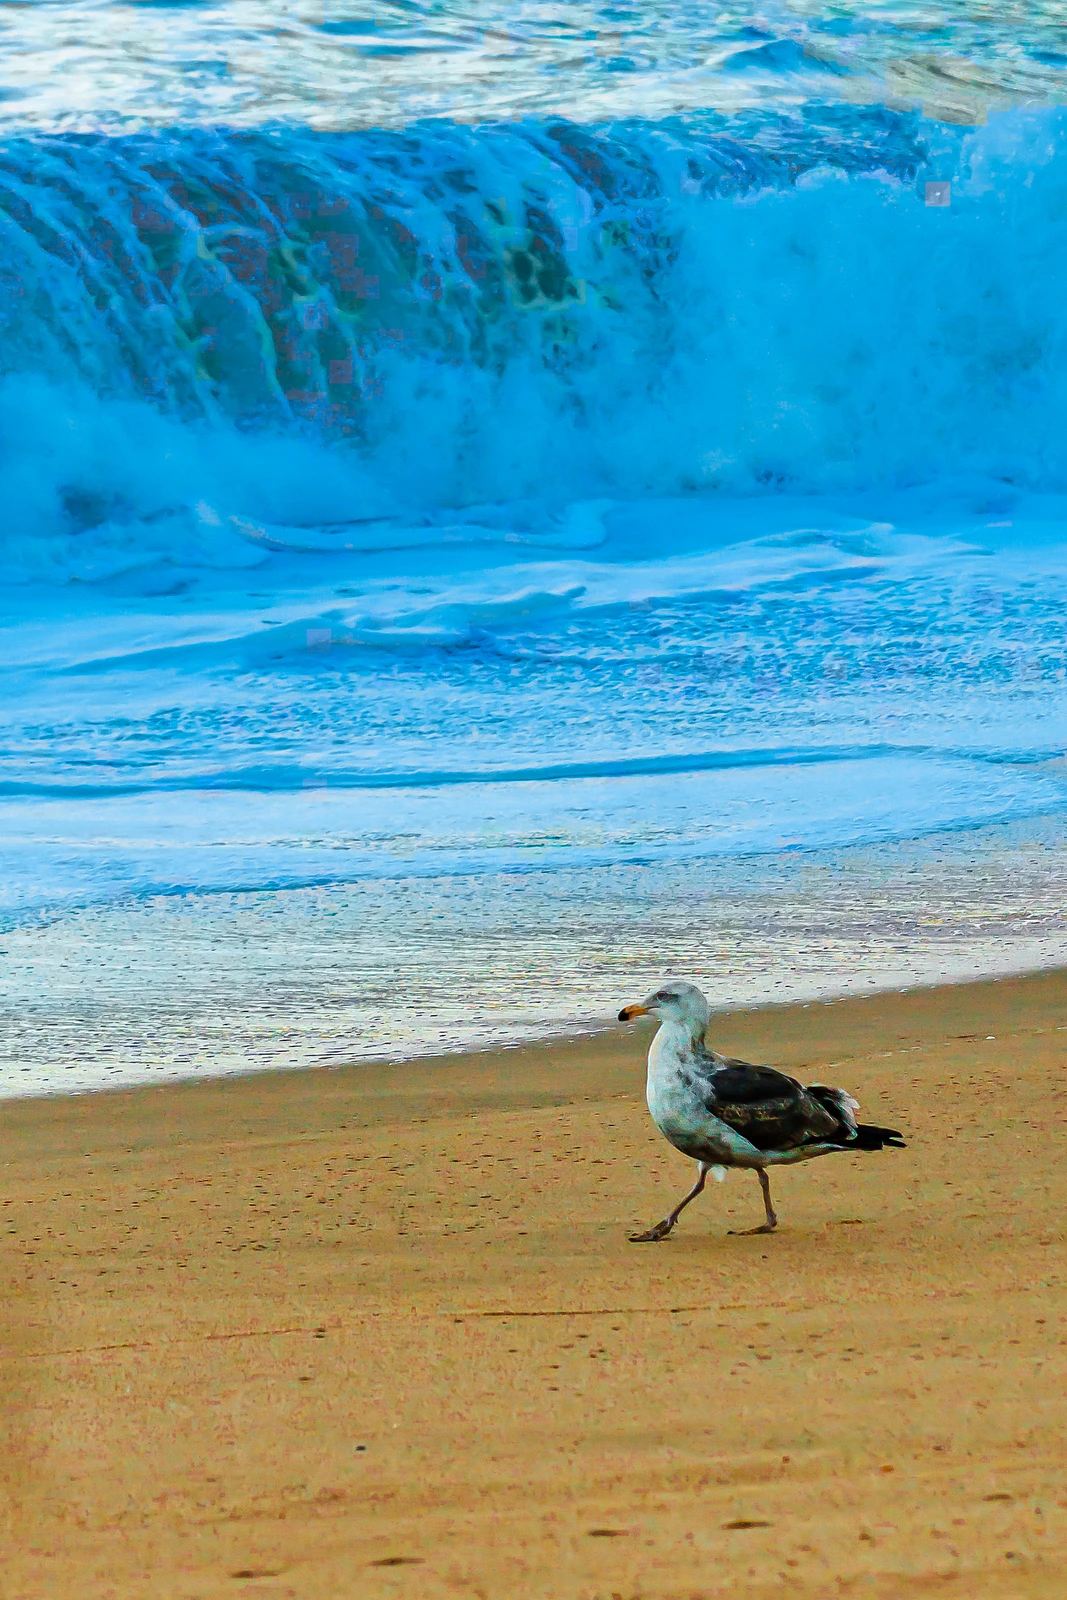 Seagull and suds. Early morning on the California coast.